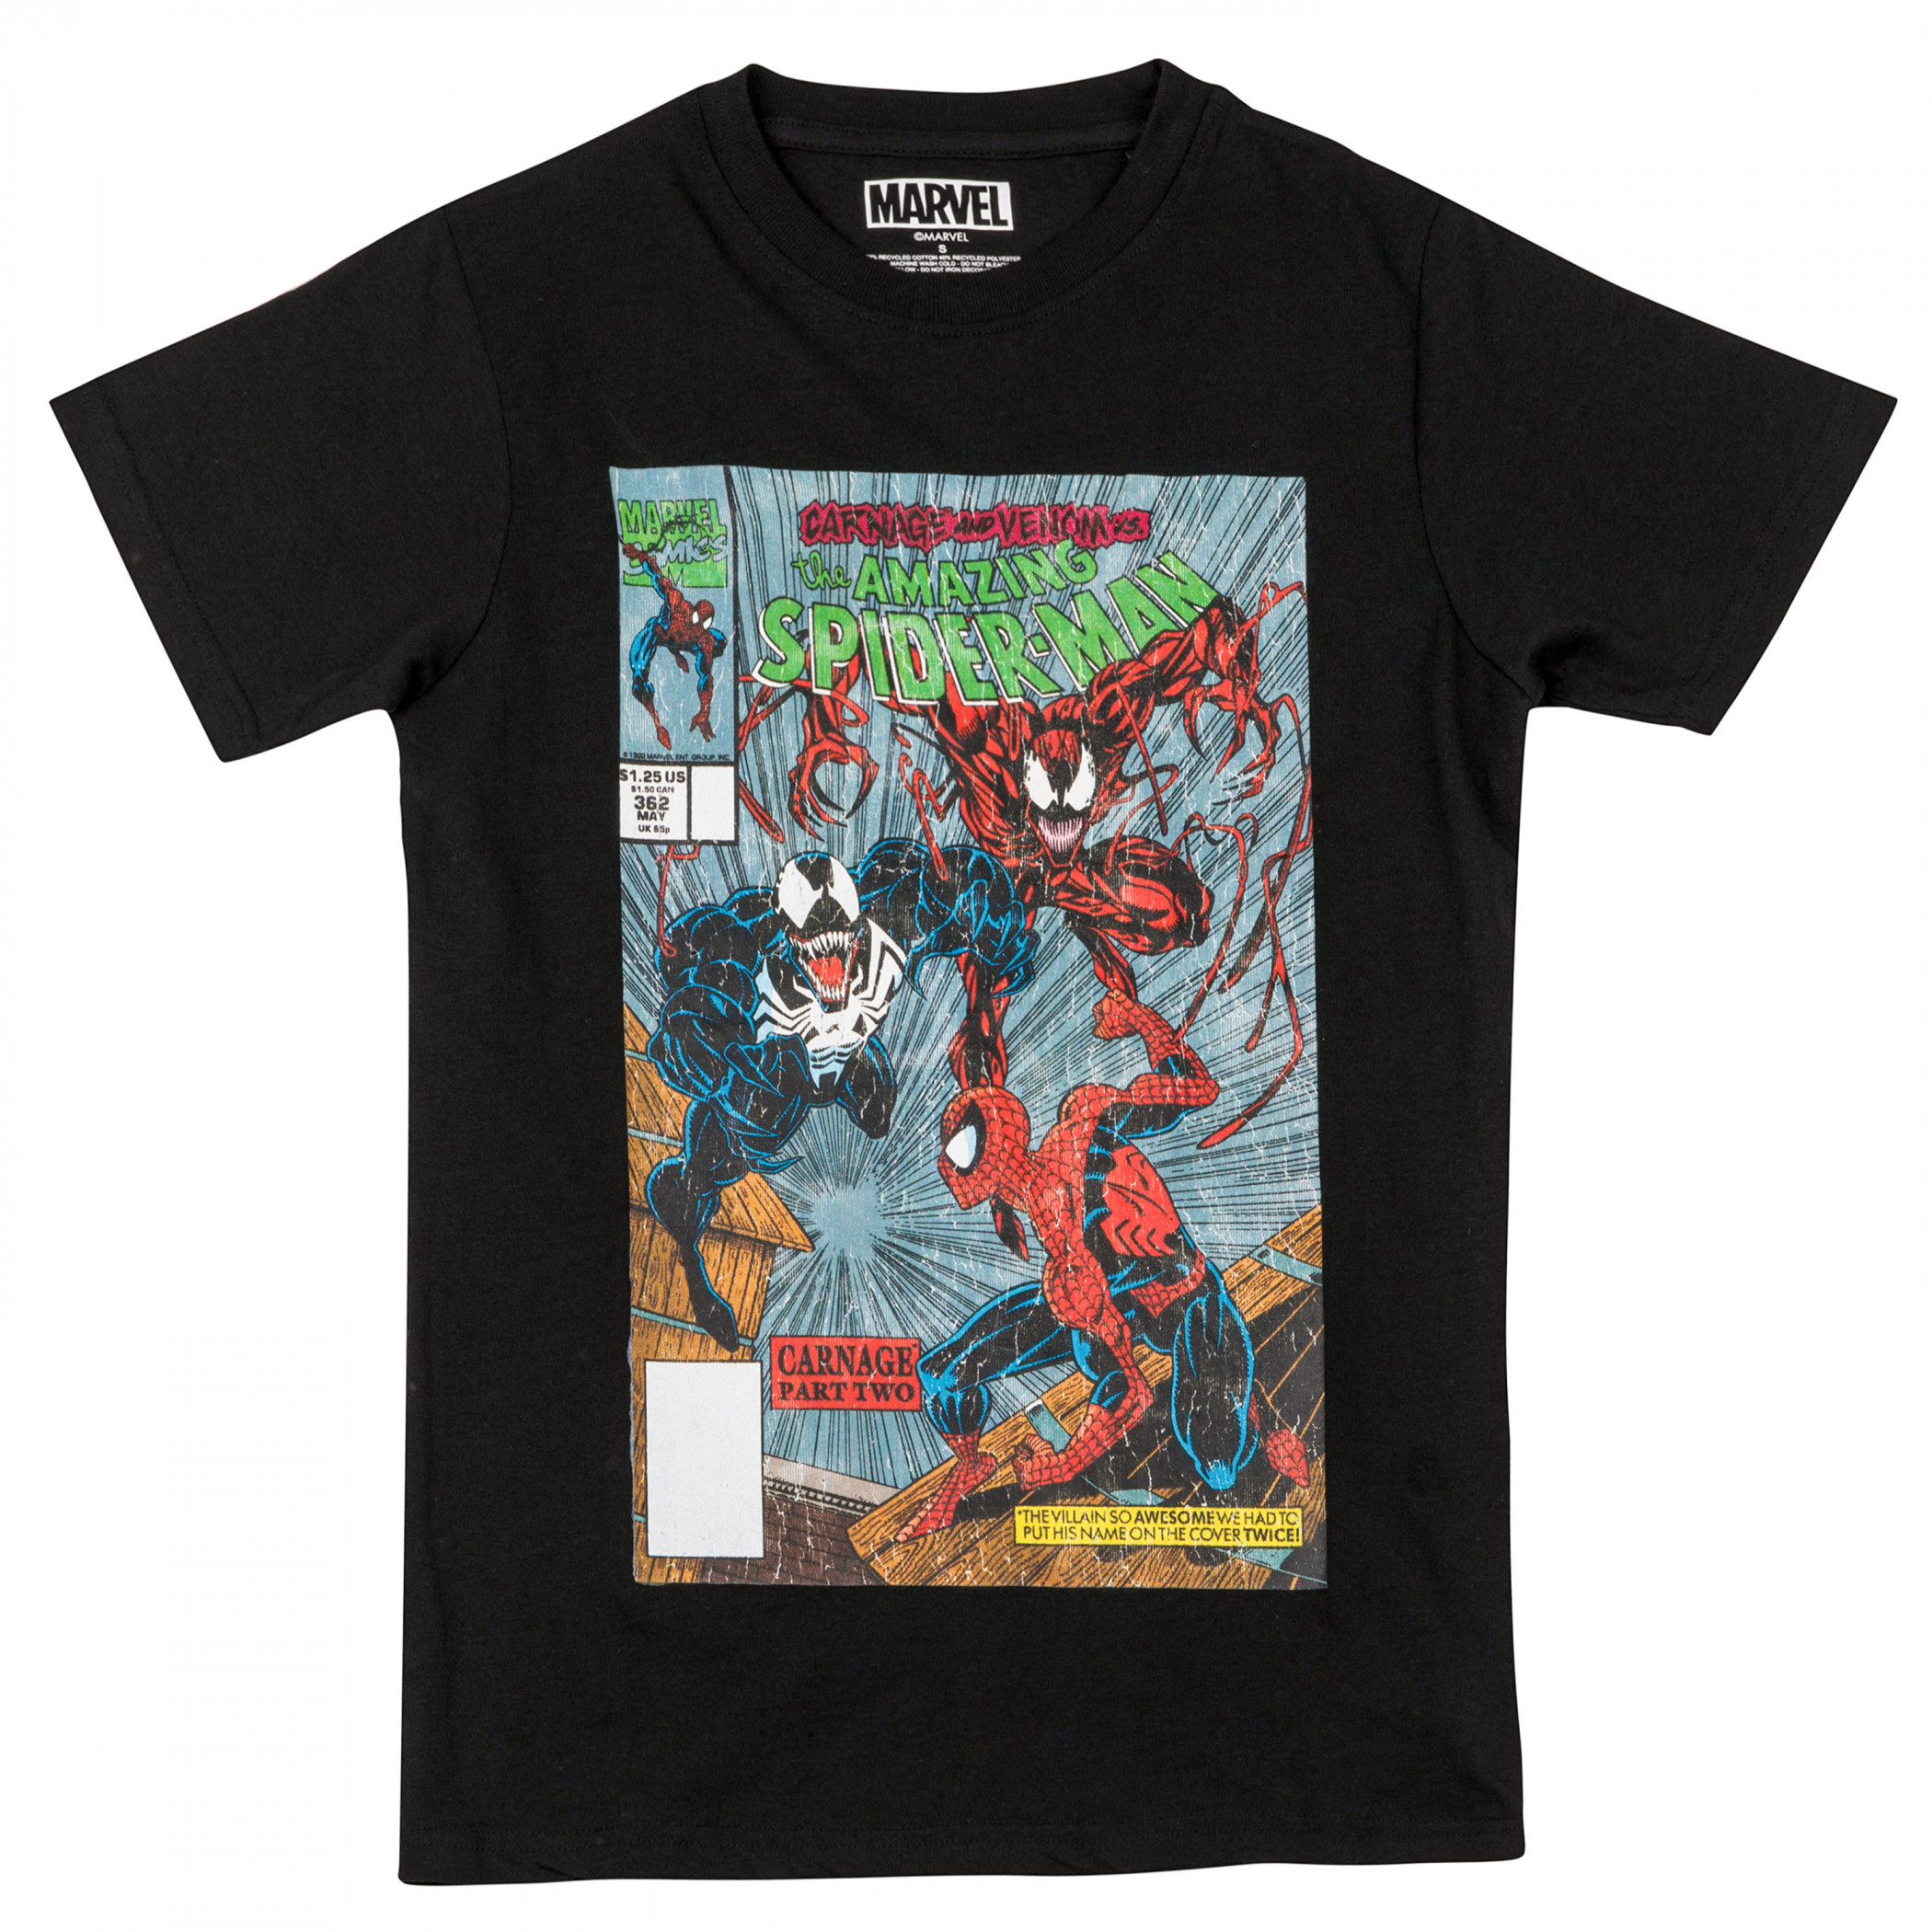 Spider-Man Venom and Carnage #362 Cover T-Shirt